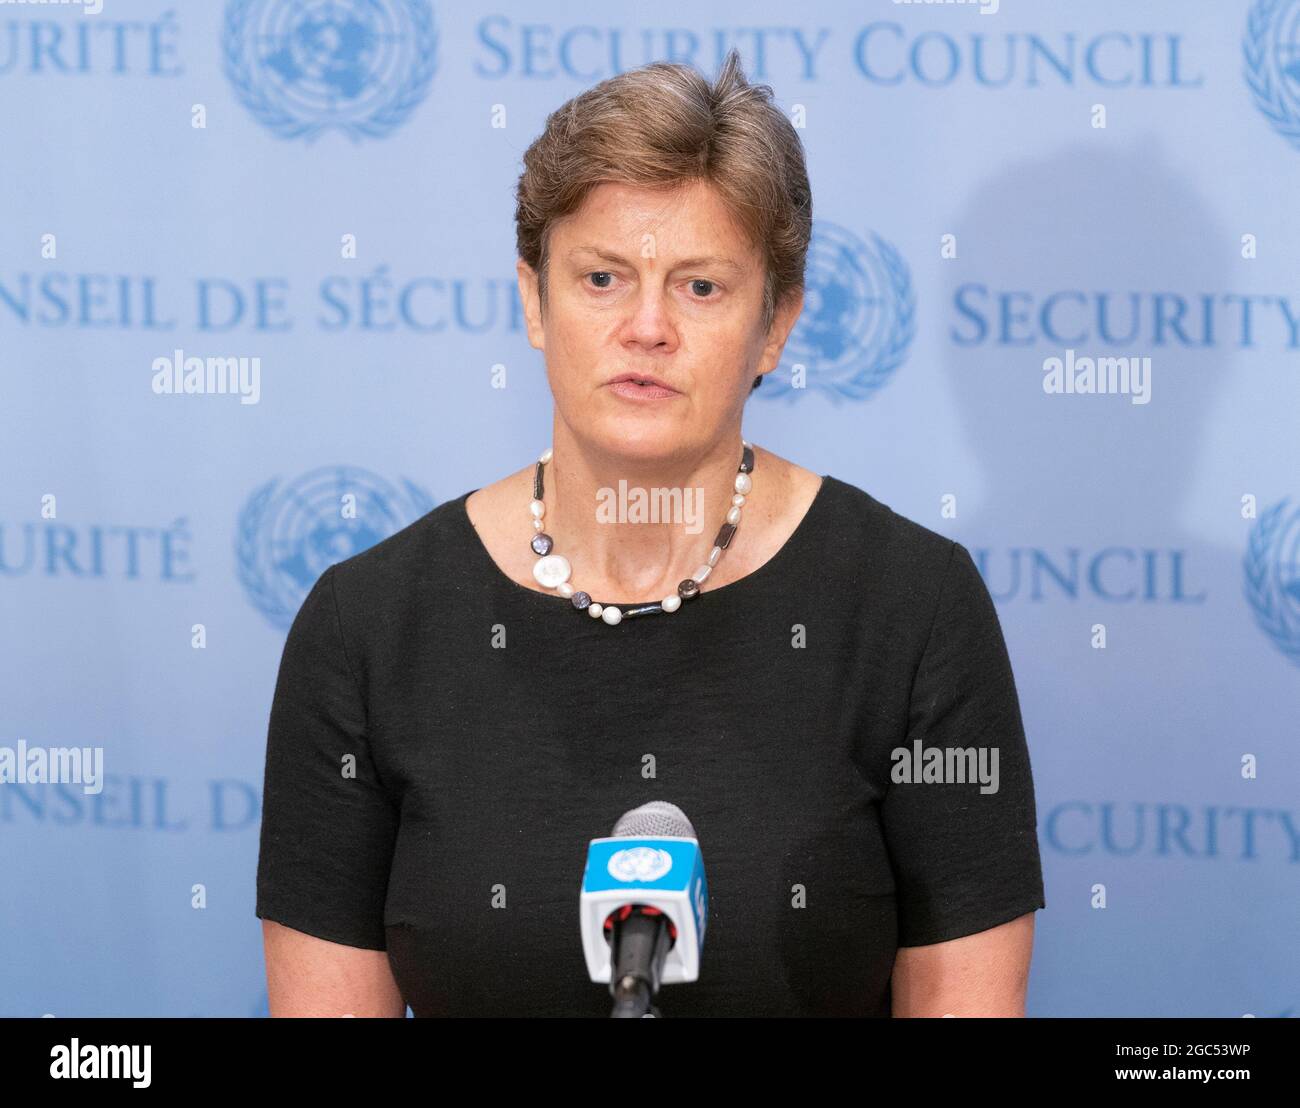 New York, United States. 06th Aug, 2021. The Permanent Representative of the United Kingdom to the UN Ambassador Dame Barbara Woodward addressed media at stakeout at UN Headquarters in New York on August 6, 2021. The Ambassador discussed the Security Council meeting on the situation in Persian Gulf, she accused Iran of being behind a drone attack on the ship off the coast of Oman in which 2 people were killed, one of them British national and another Romanian. (Photo by Lev Radin/Sipa USA) Credit: Sipa USA/Alamy Live News Stock Photo